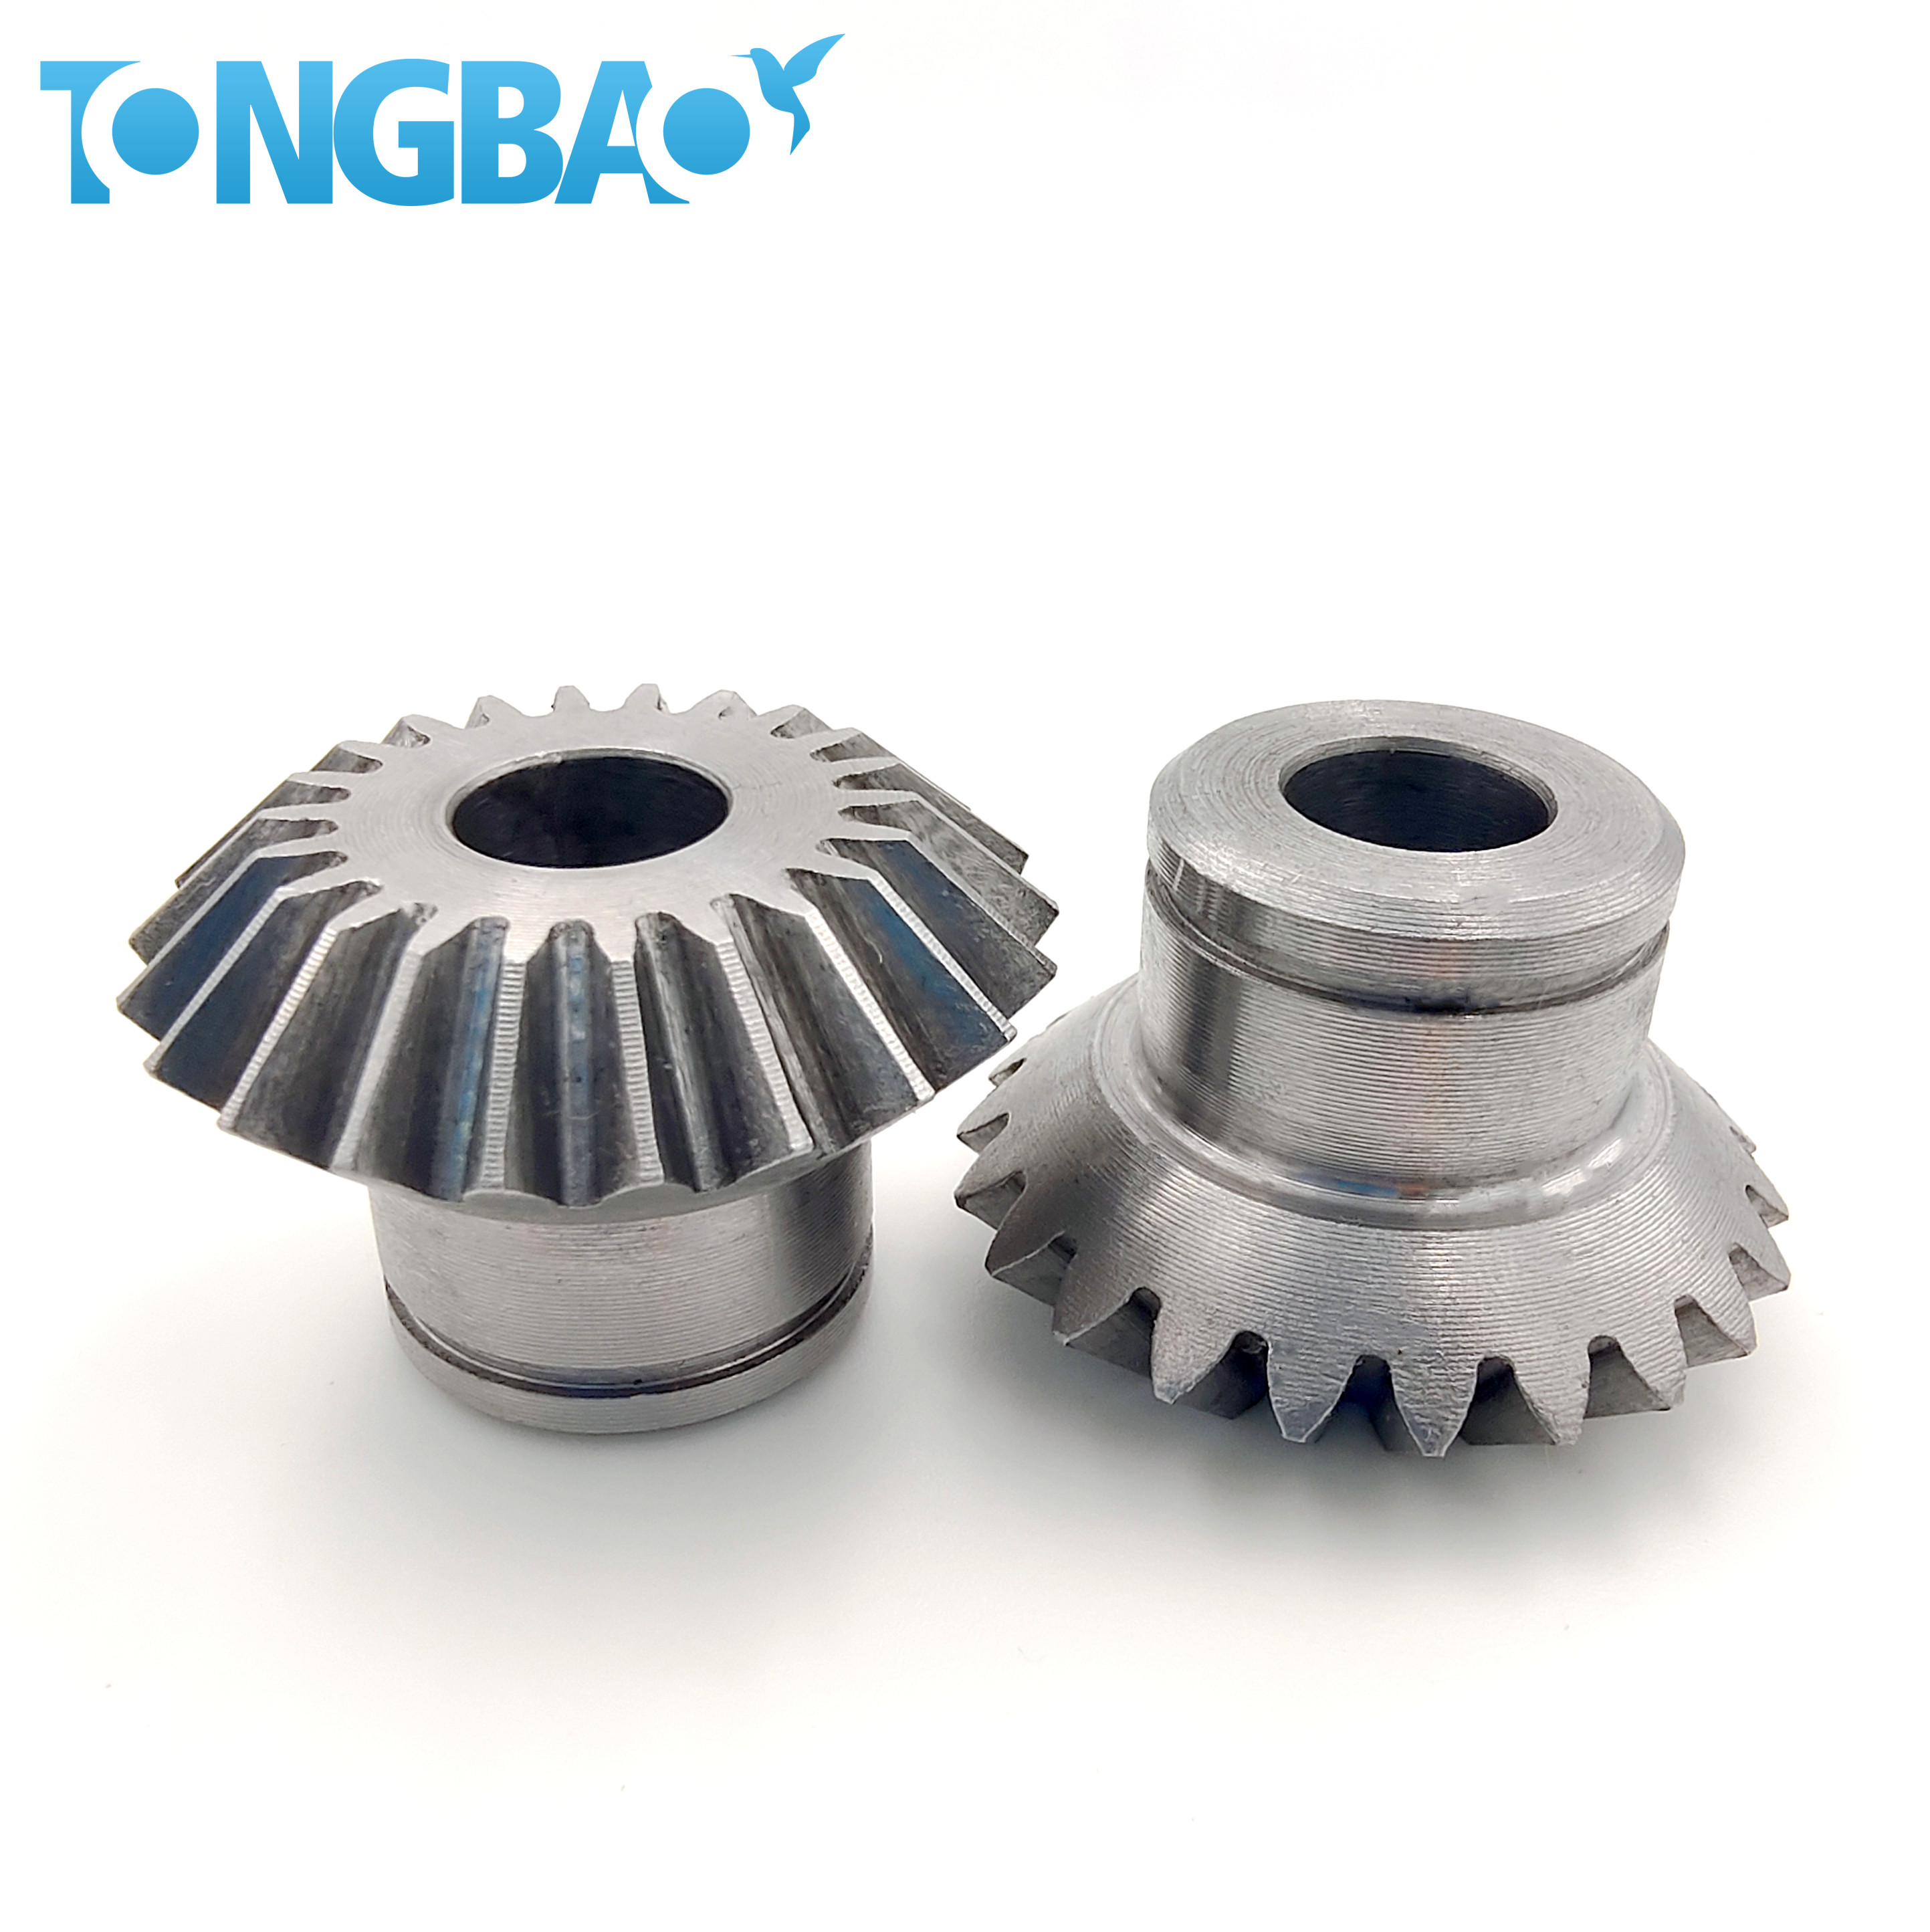 C45/Stainless Zinc Plated 16T/22T/24T Bevel gear